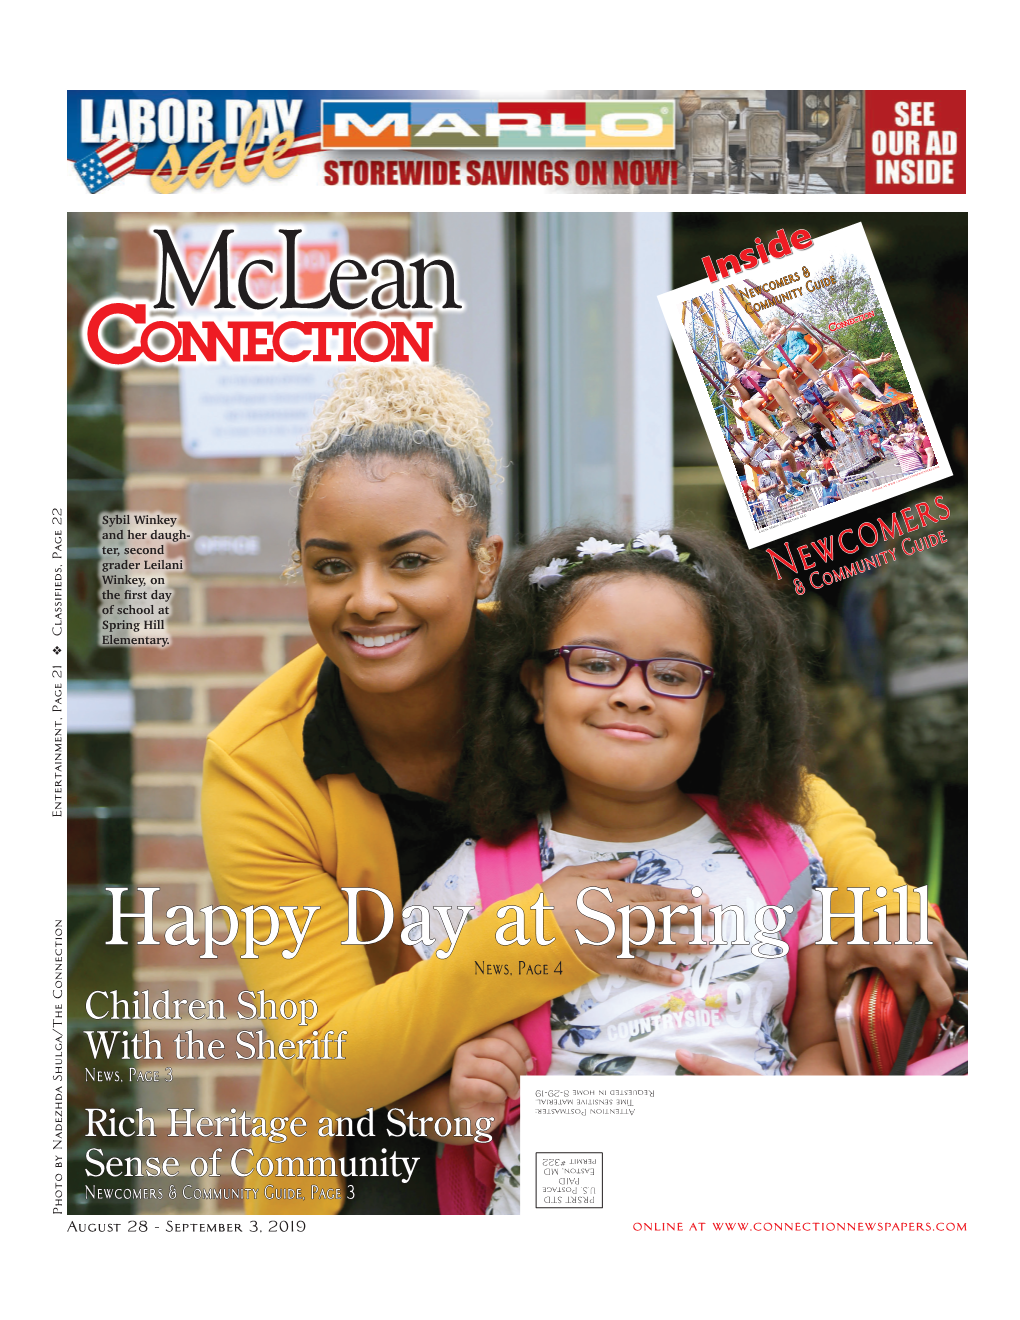 Mclean Community Center, Mclean Day Is Held on the Third Saturday In